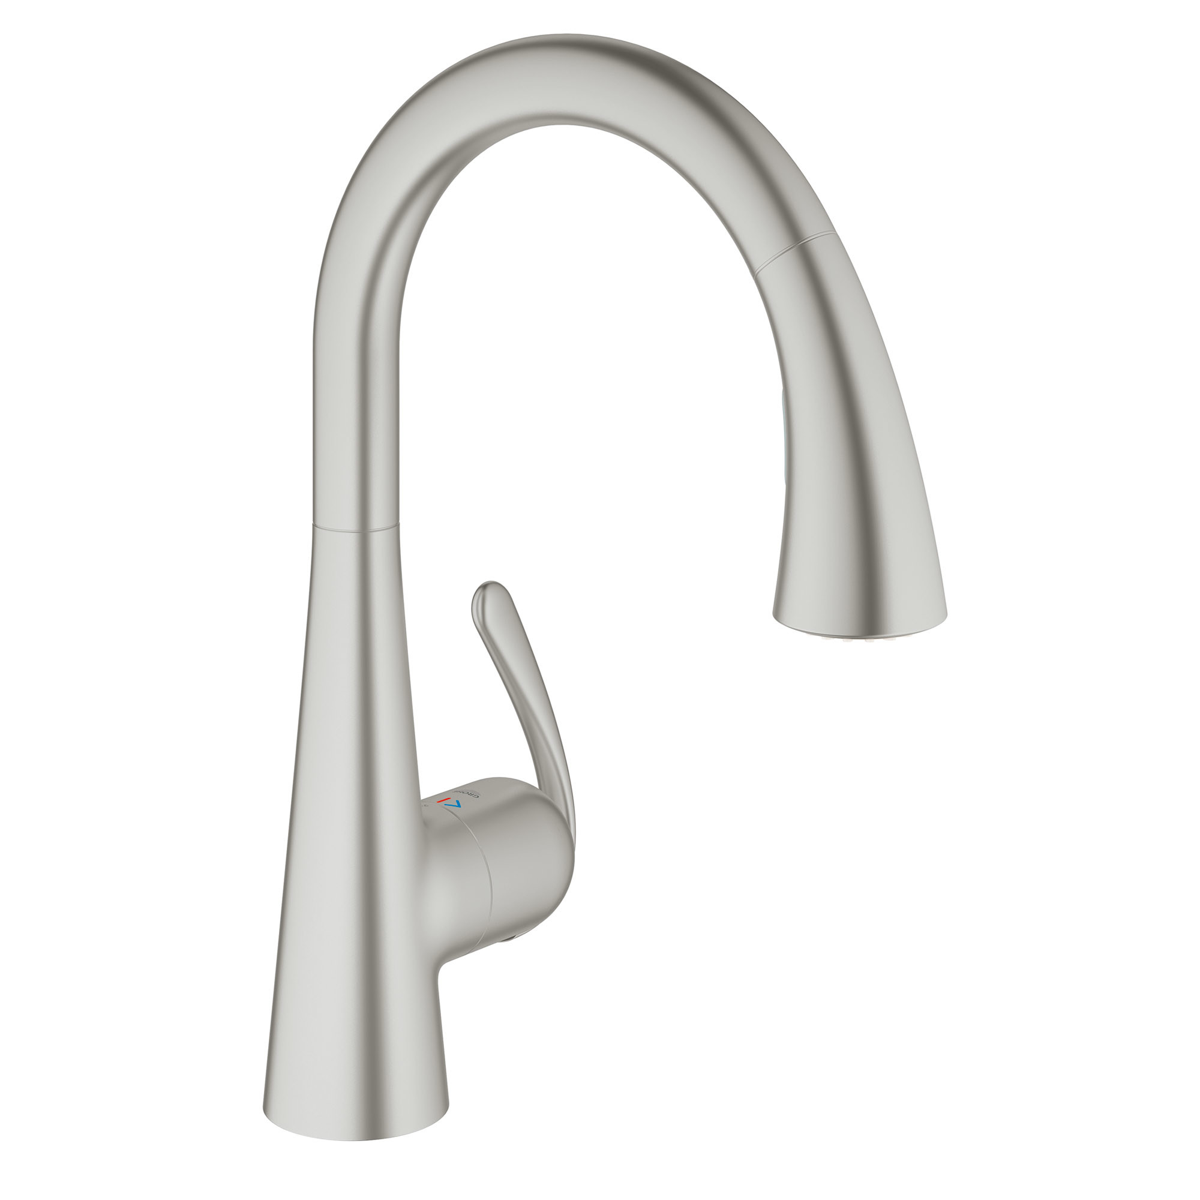 Grohe LadyLux FootControl pull-down kitchen faucet. Photo courtesy of Grohe at Ferguson Bath, Kitchen & Lighting Gallery.